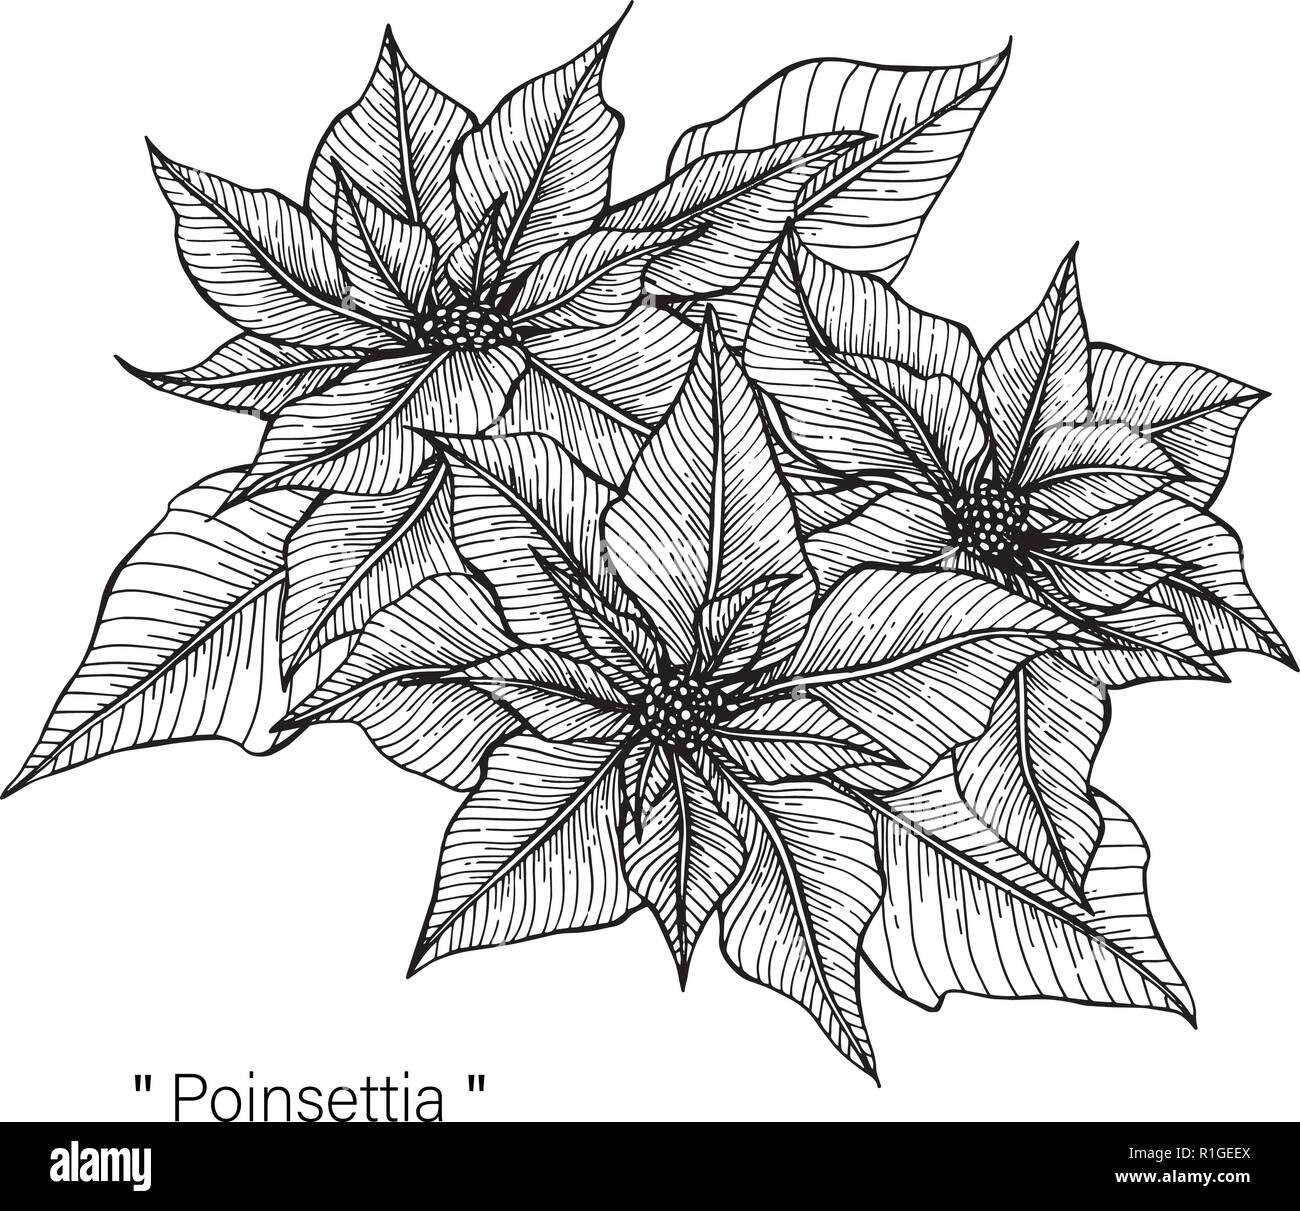 Poinsettia drawing illustration by hand drawn line art. Stock Vector